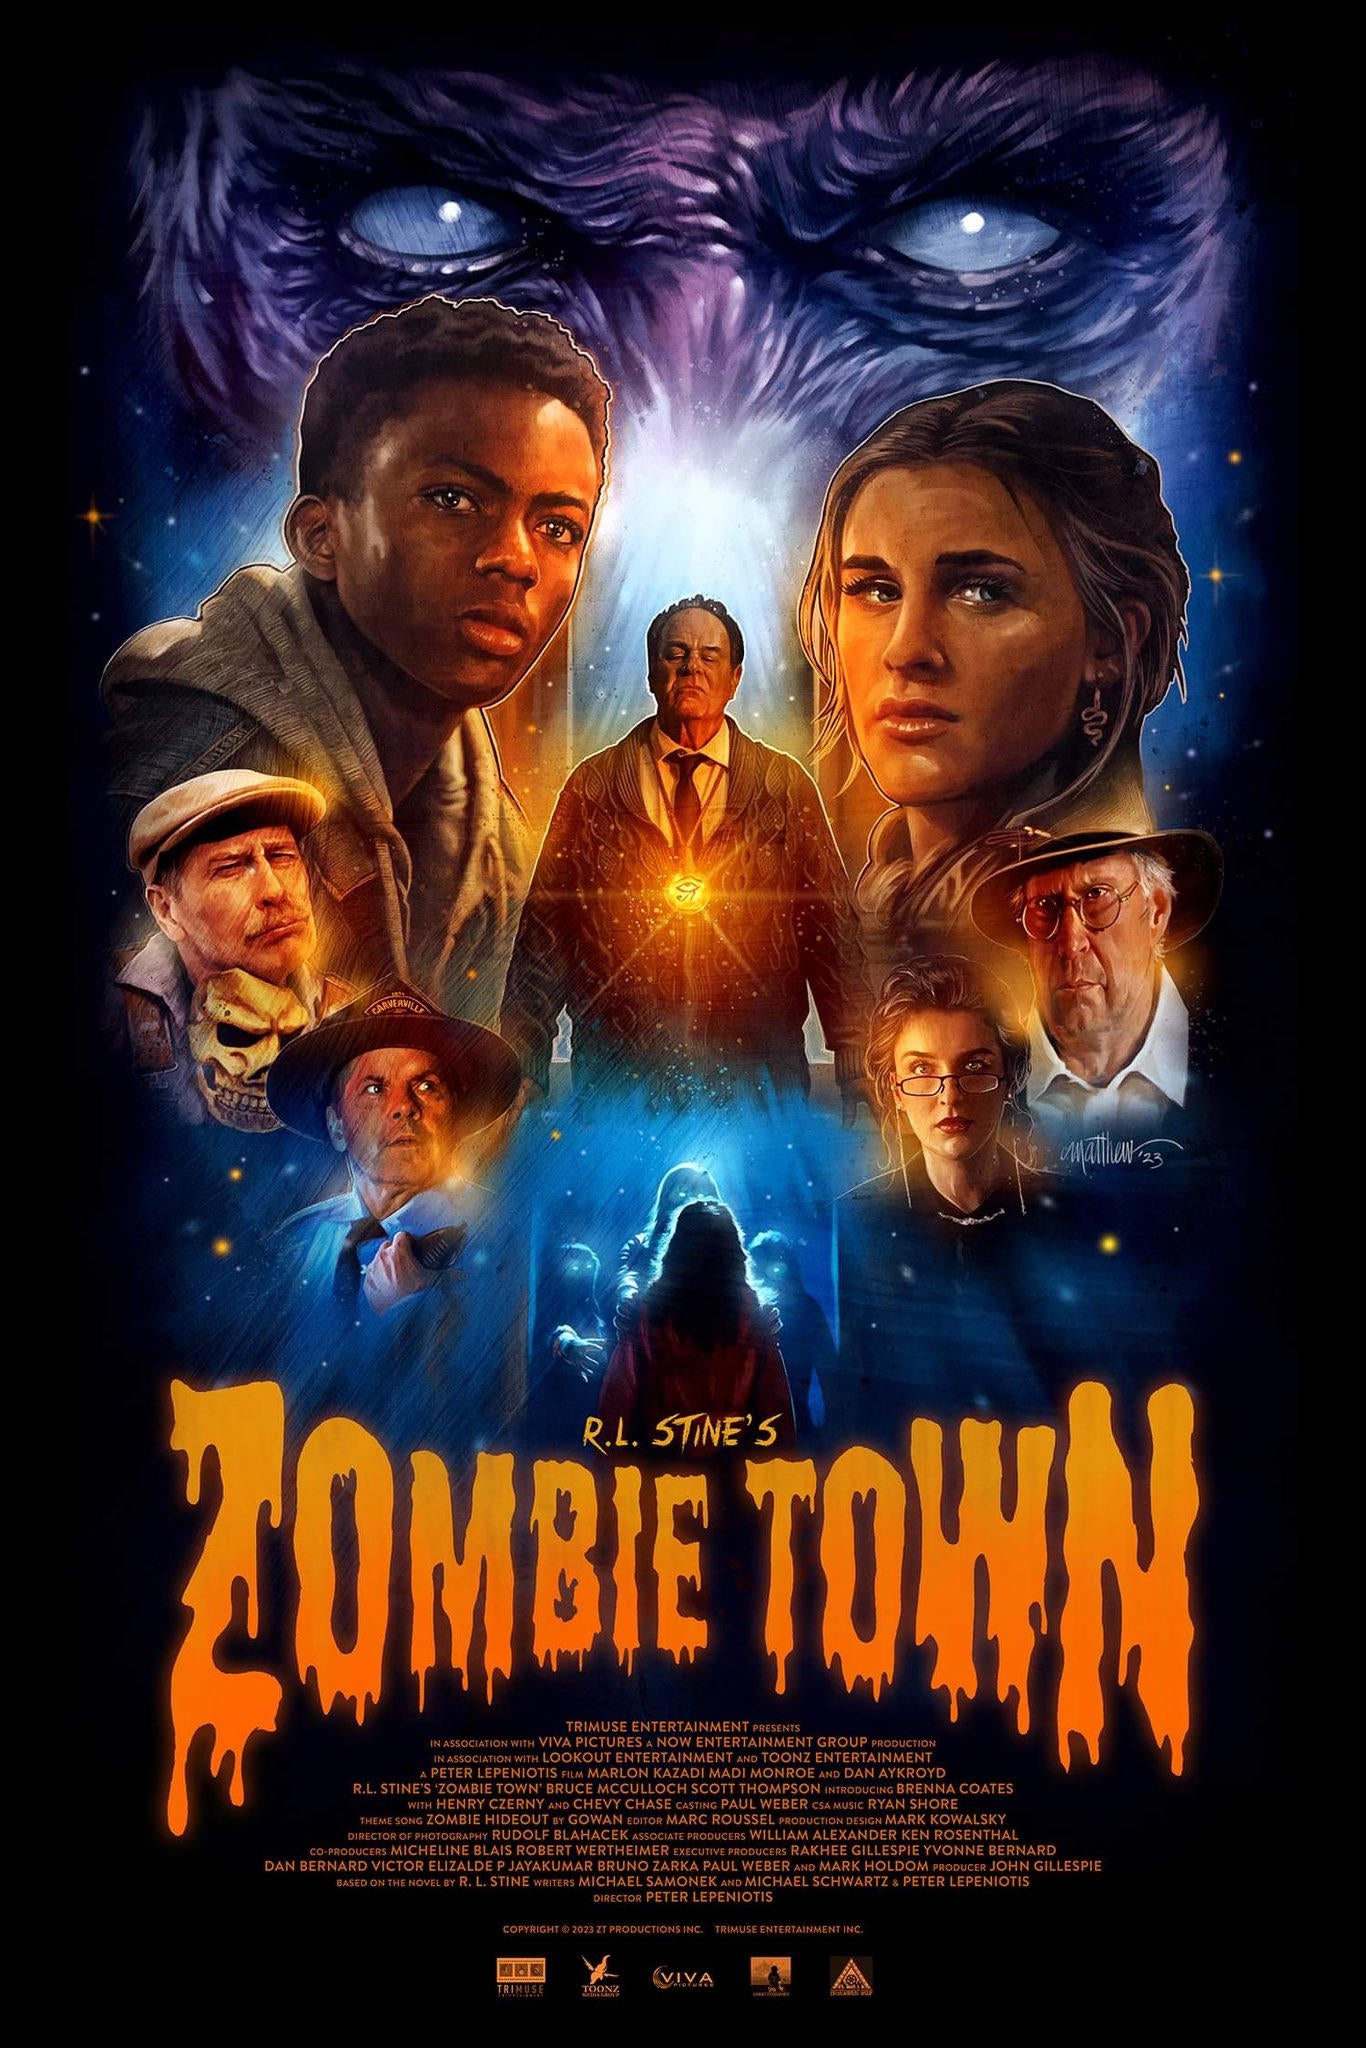 R.L. Stine's Zombie Town Gets Official Poster